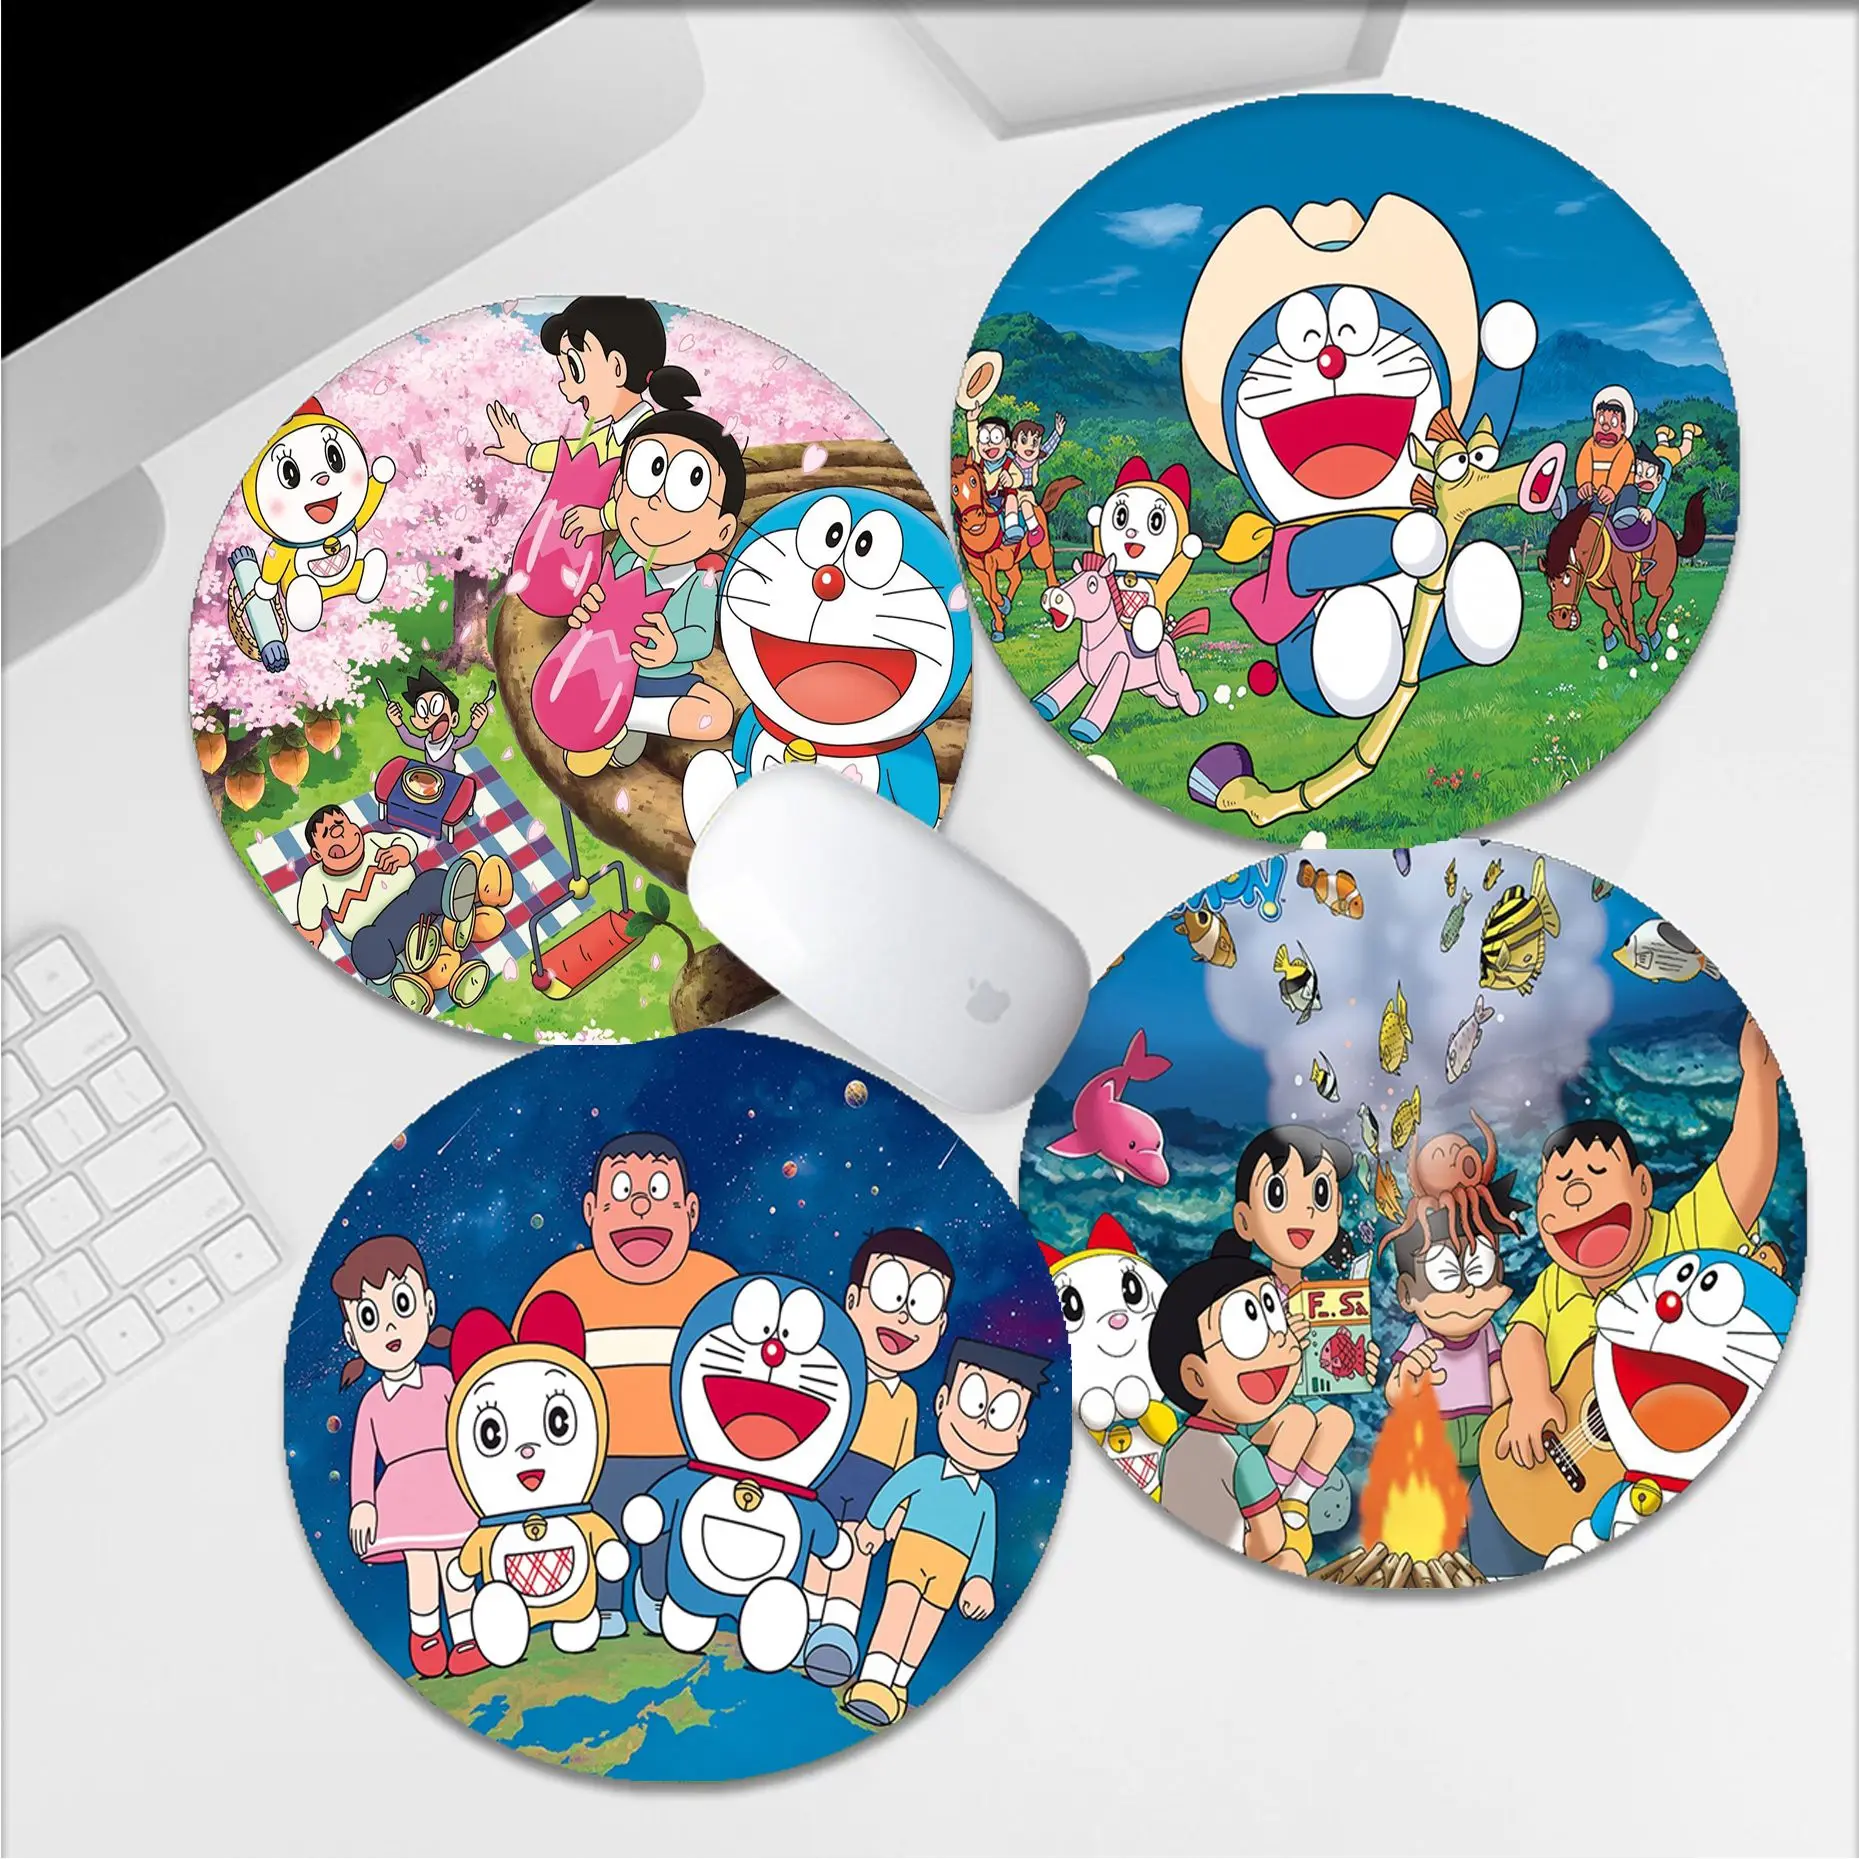 MINISO Anime D-Doraemon Mousepad Small Round Big Promotion Table Mat Student Mousepad Computer Keyboard Pad Padmouse Desk Play